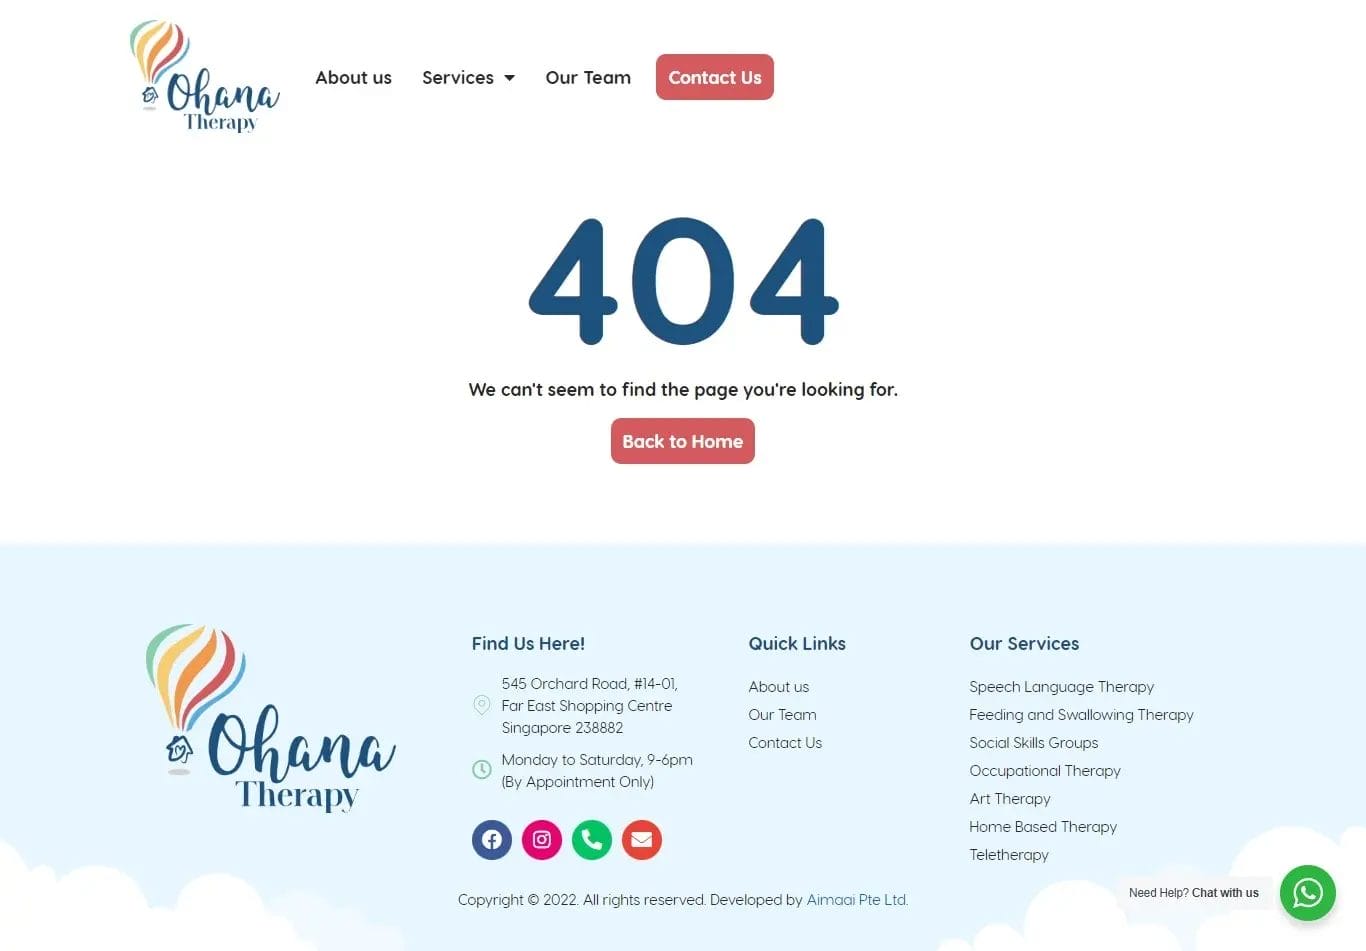 Ohana Therapy 404 page layout and design